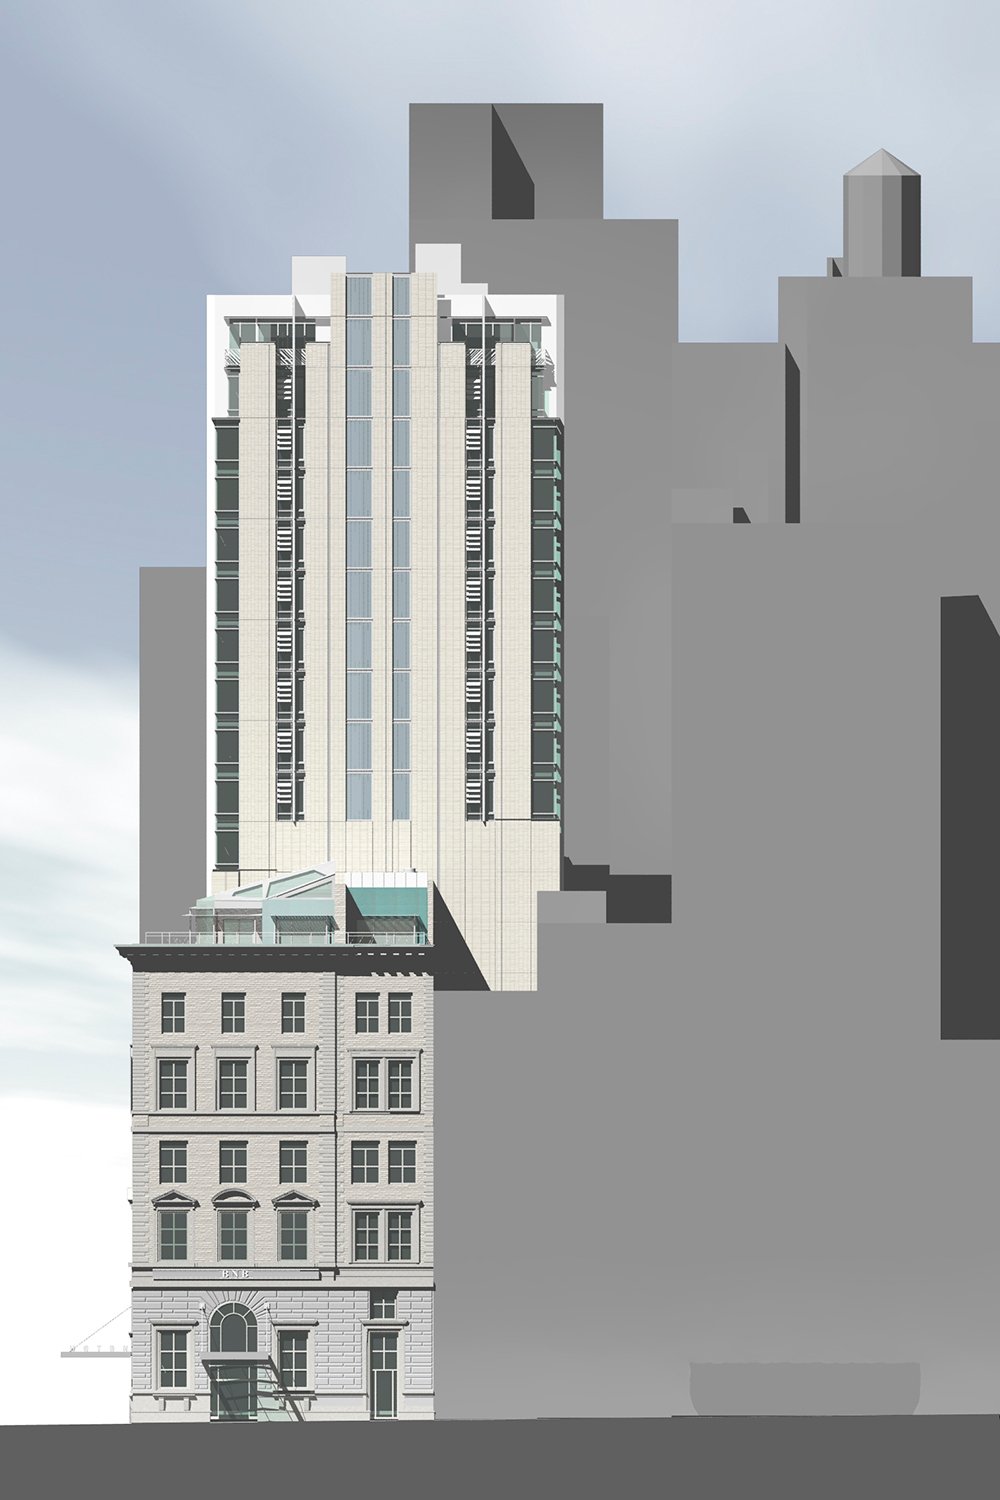 Fifth Avenue Hotel Progresses at 250 Fifth Avenue in NoMad, Manhattan - New  York YIMBY